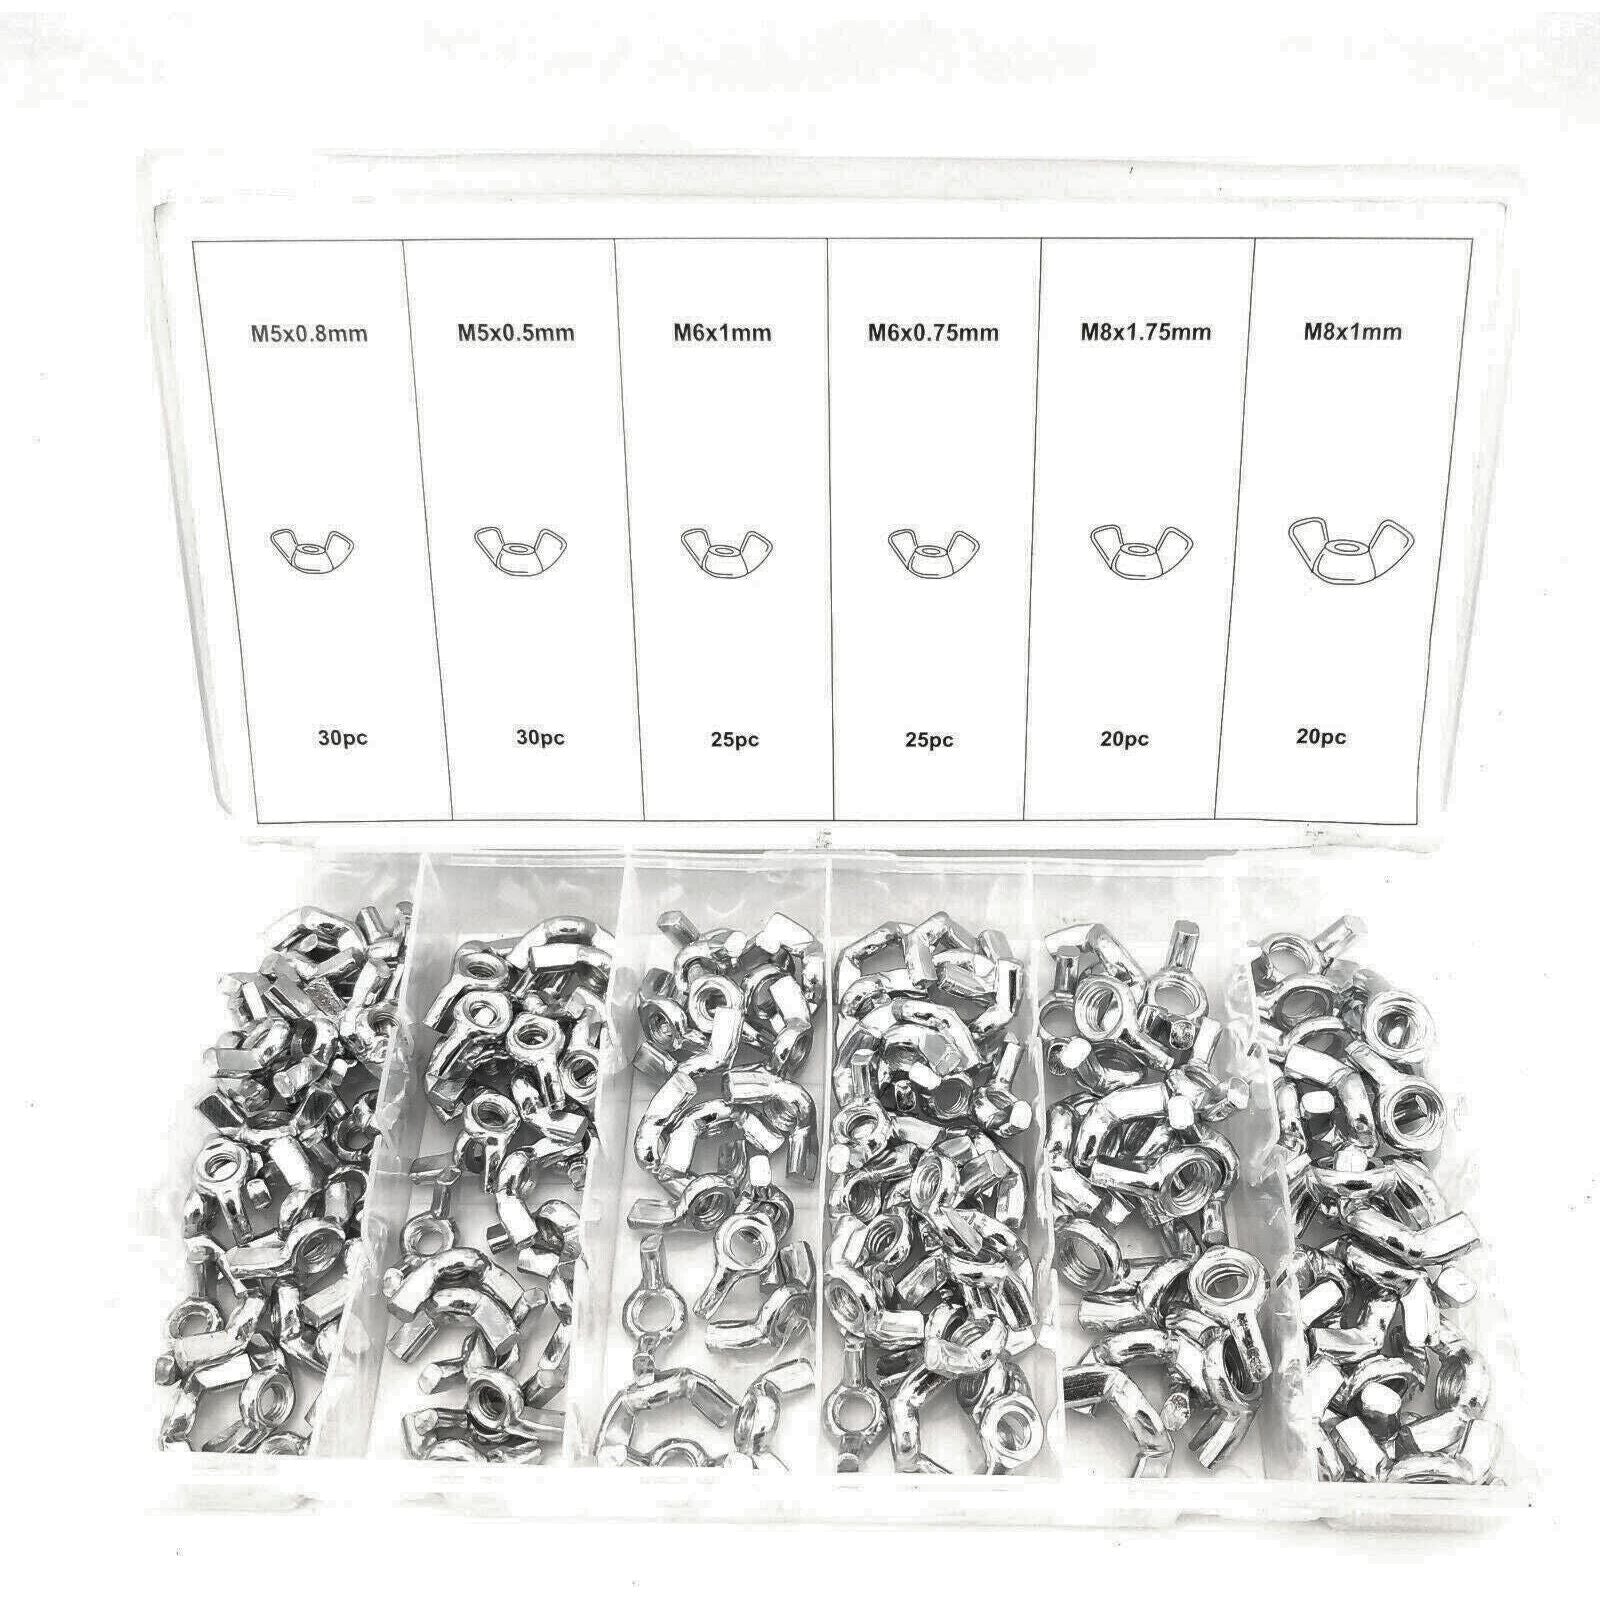 150 piece Wing Nut Assortment Metric Butterfly Professional Industry Tool Assortment Kit - South East Clearance Centre